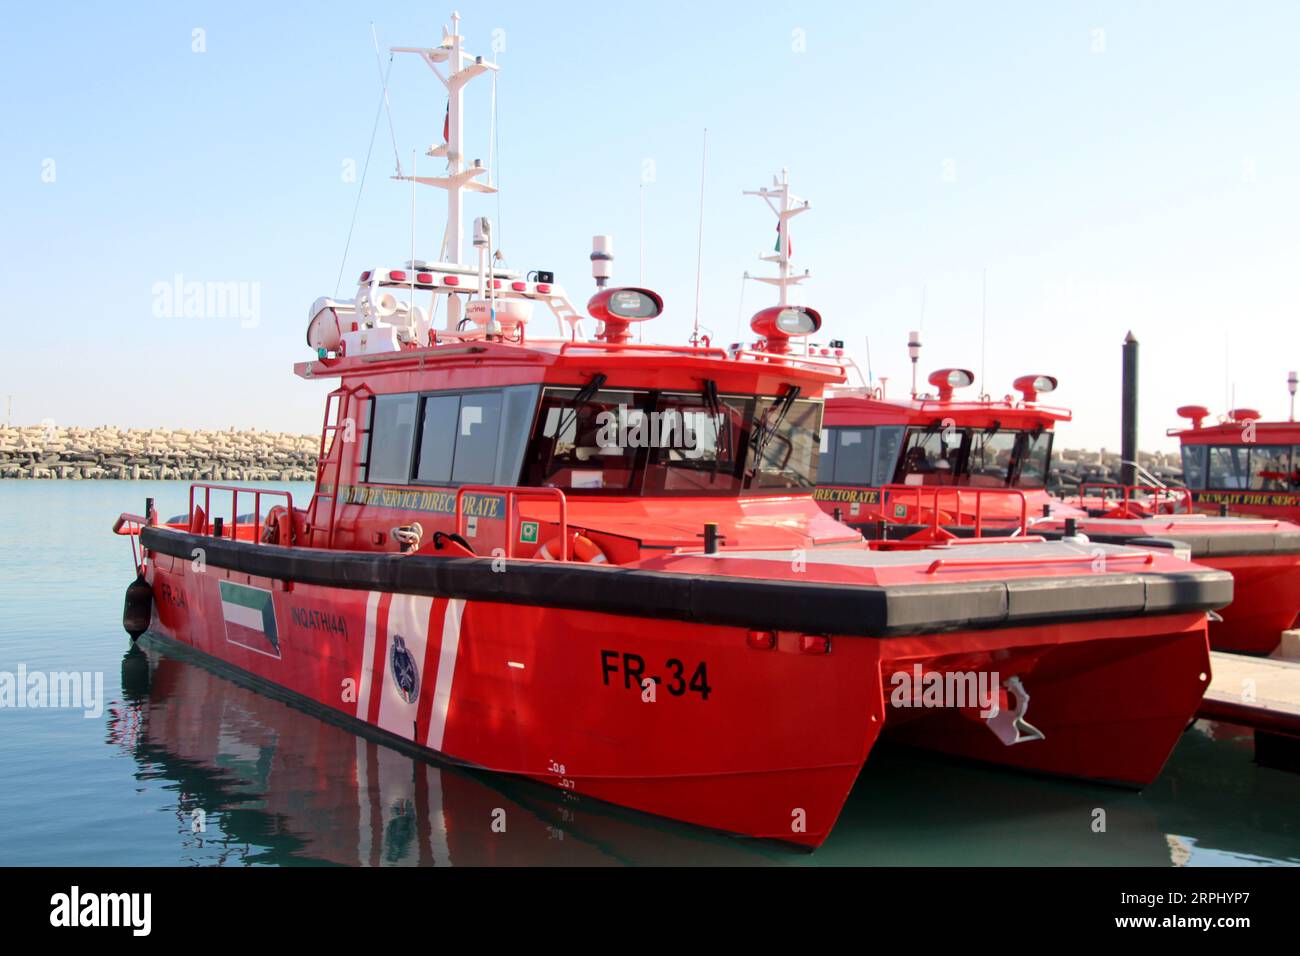 191120 -- HAWALLI GOVERNORATE, Nov. 20, 2019 Xinhua -- A new batch of naval boats for search and rescue operations are seen in Hawalli Governorate, Kuwait, on Nov. 20, 2019. Kuwait Fire Service Directorate KFSD launched on Wednesday a new batch of naval boats with the latest navigational equipment to facilitate search and rescue operations, KFSD Director-General Khaled Al-Mekrad said. Xinhua KUWAIT-HAWALLI GOVERNORATE-NEW RESCUE BOATS PUBLICATIONxNOTxINxCHN Stock Photo